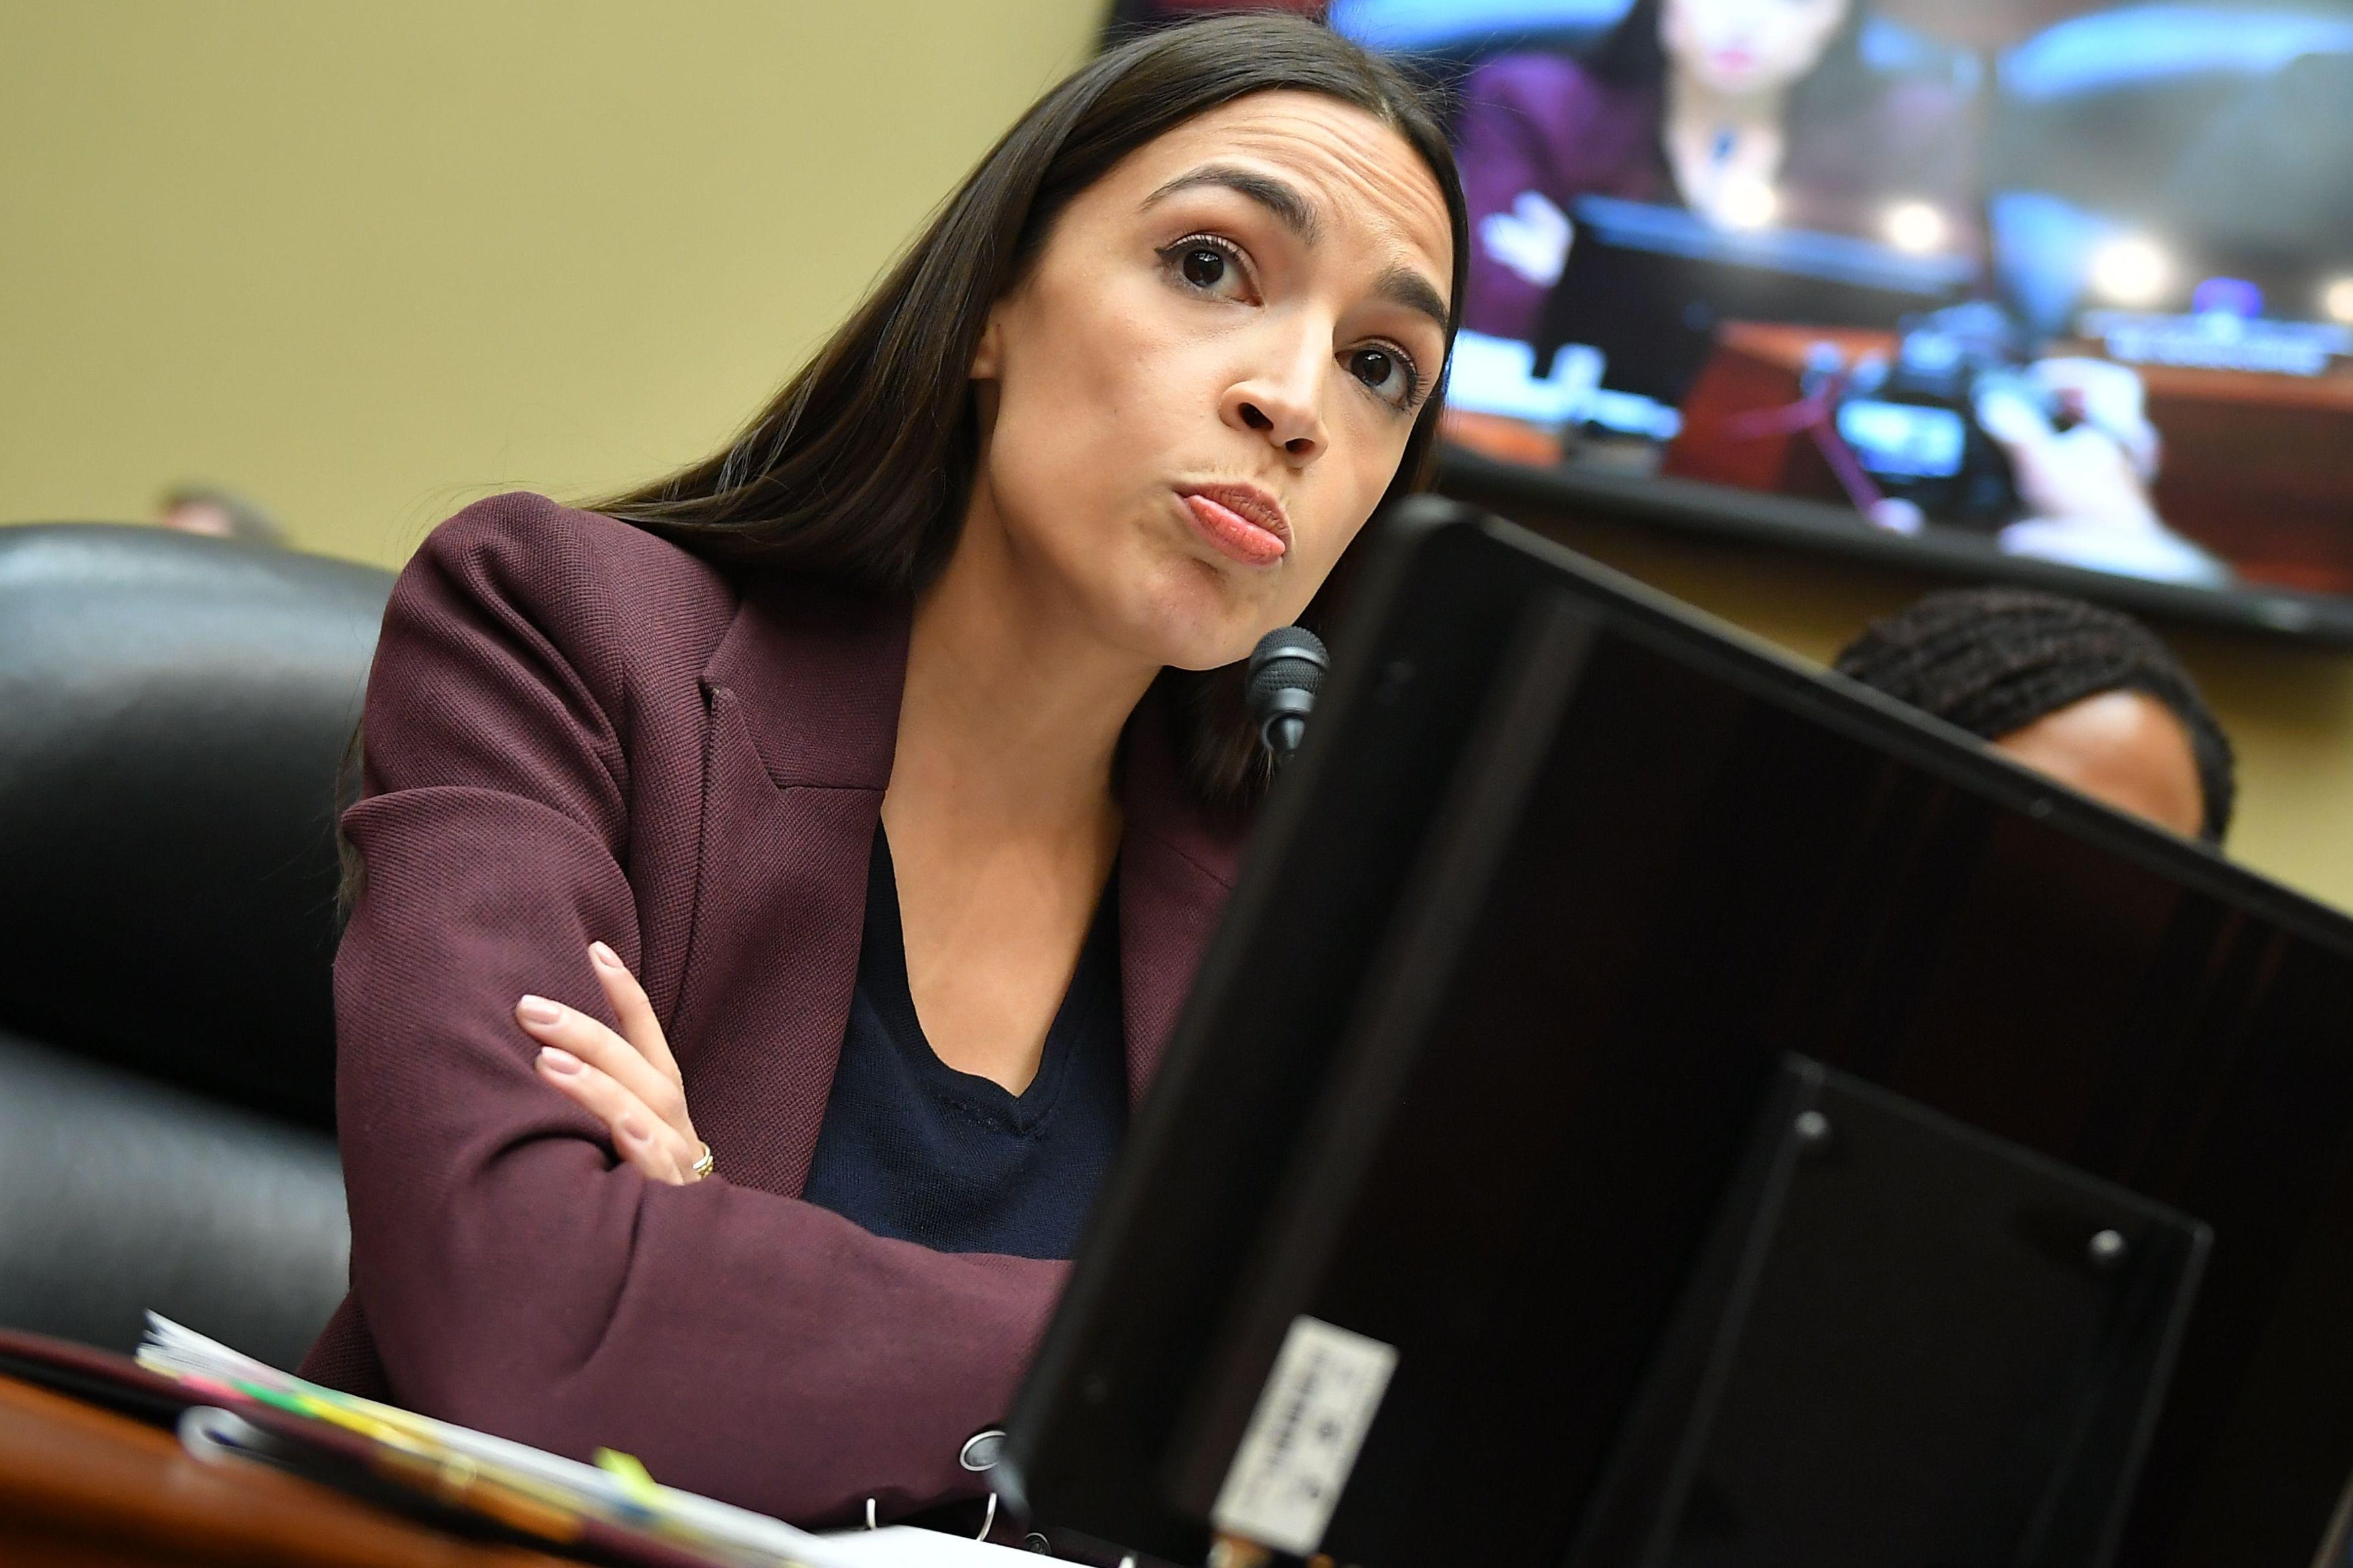 Rep. Alexandria Ocasio-Cortez, Democrat of New York, questions Michael Cohen, President Donald Trump's former personal attorney, as he testifies before the House Oversight and Reform Committee in the Rayburn House Office Building on Capitol Hill in Washington, D.C. on February 27, 2019.